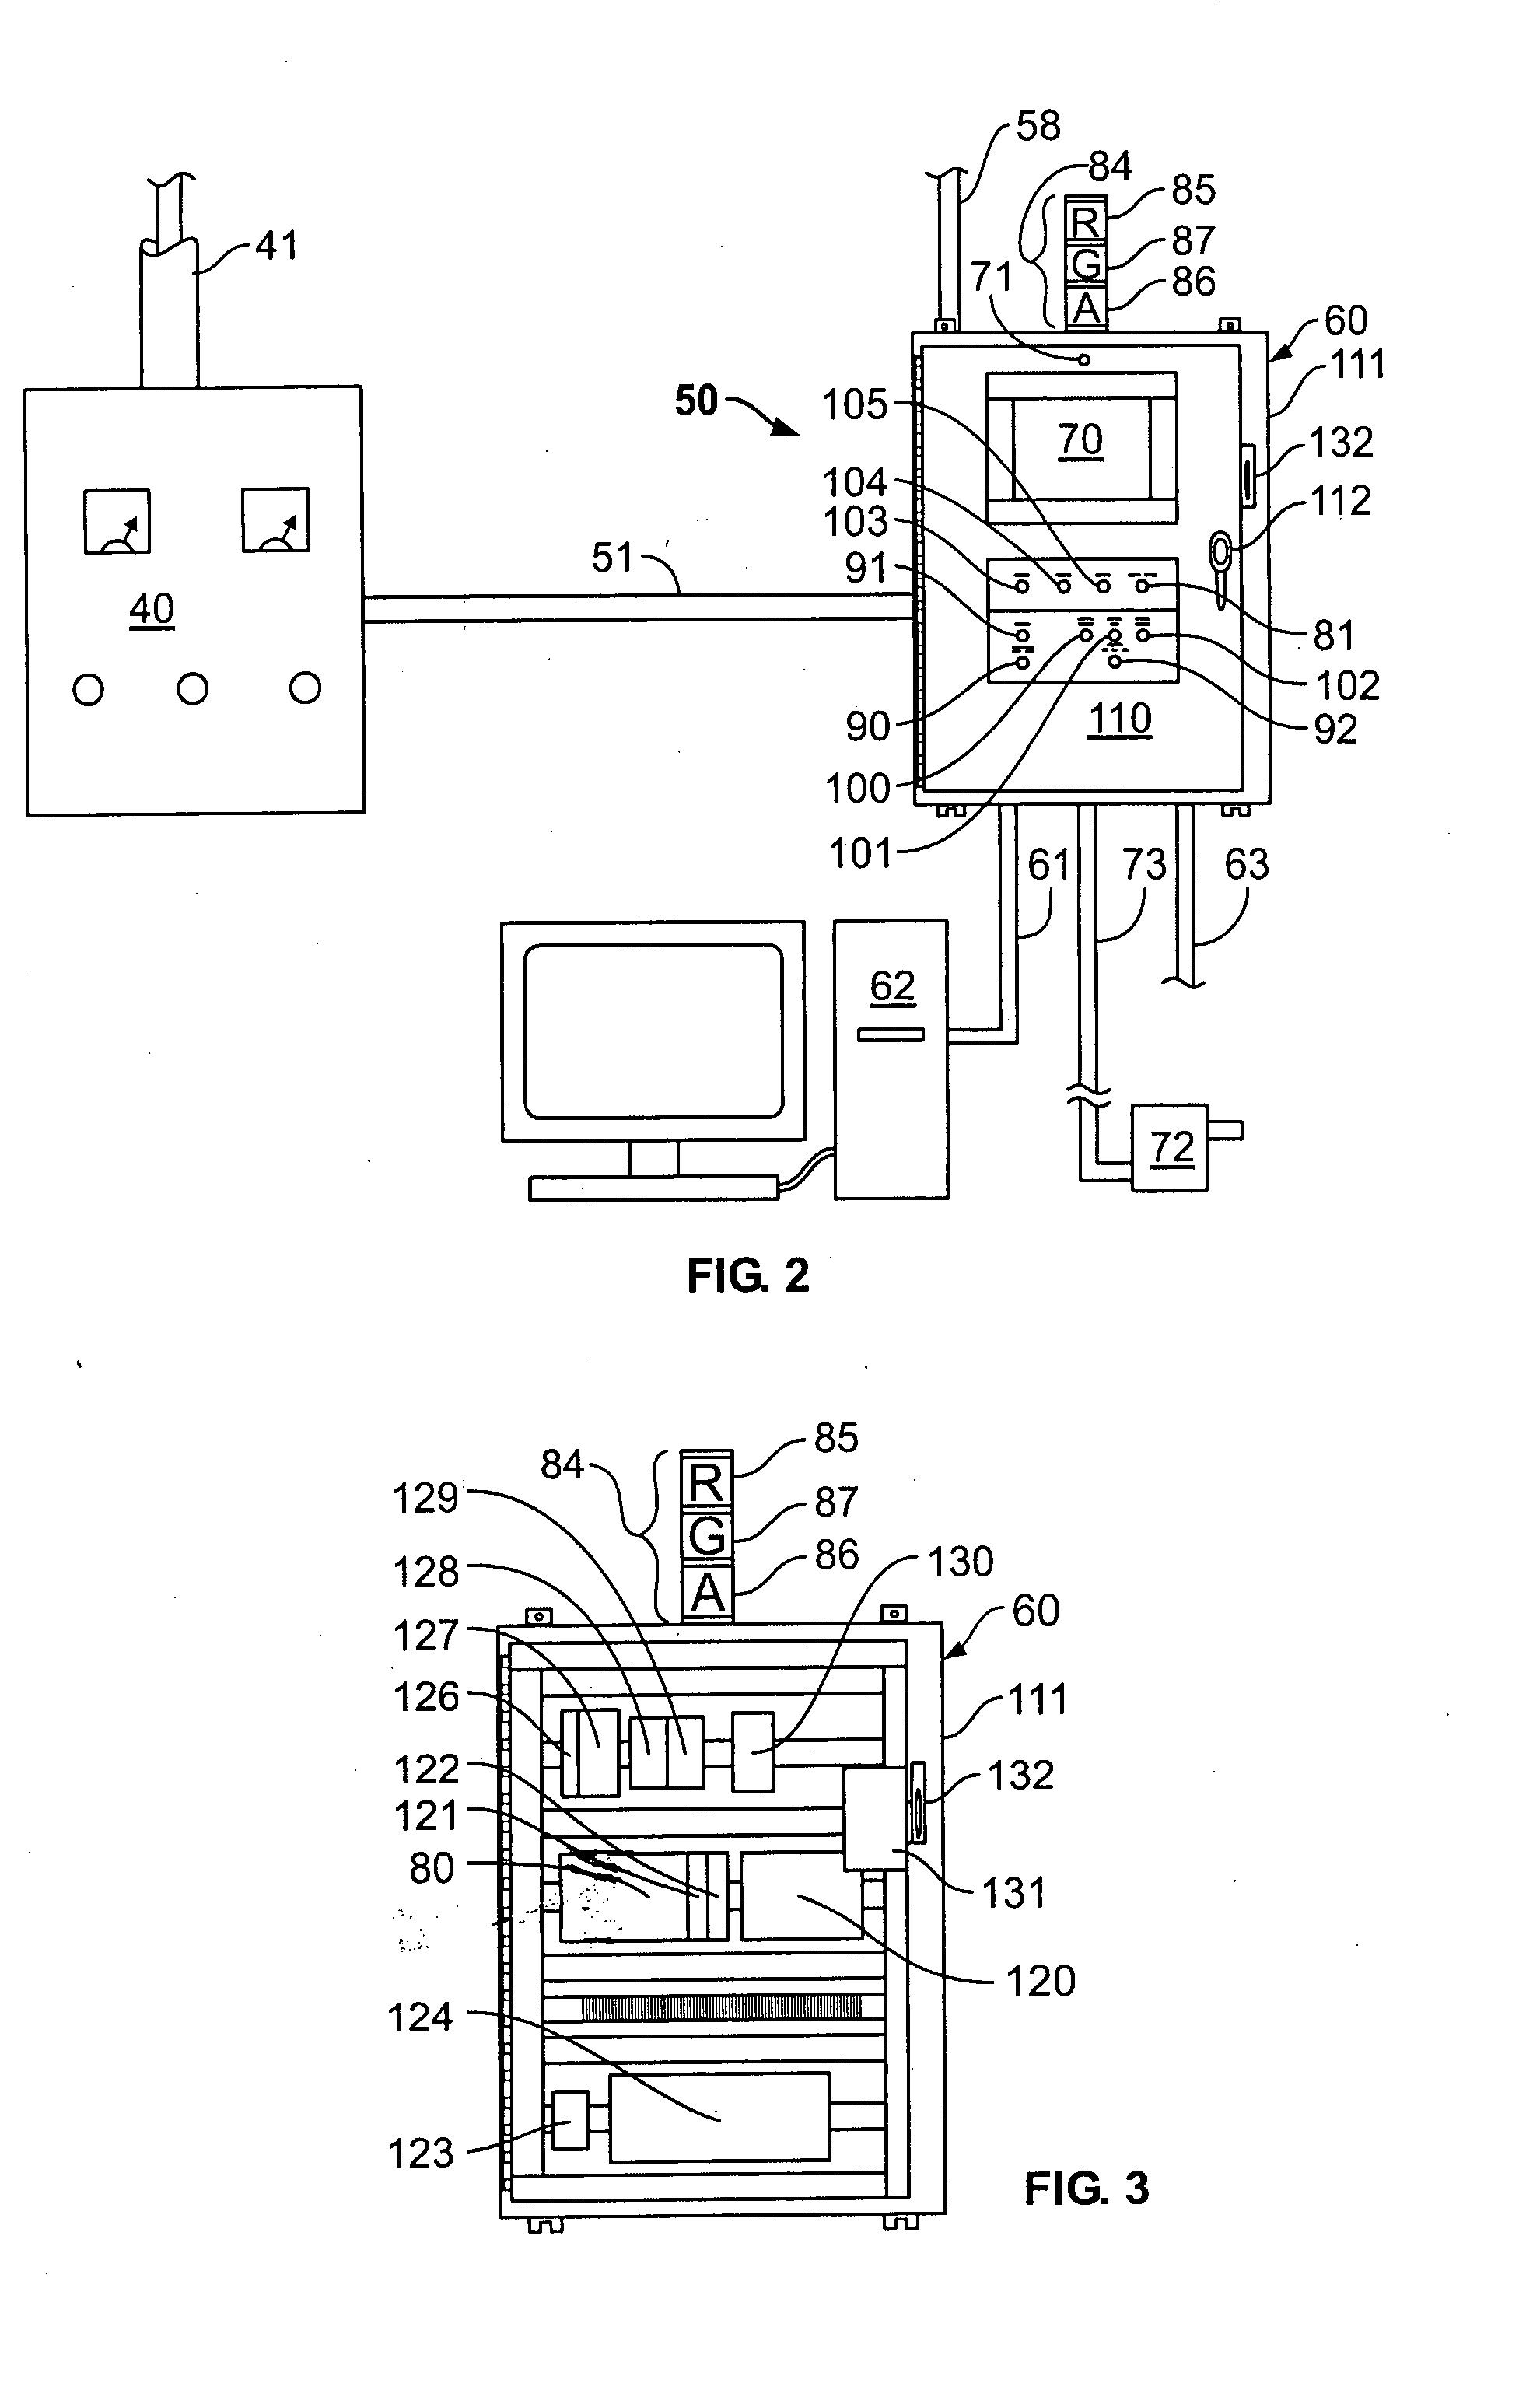 Building protection system and method